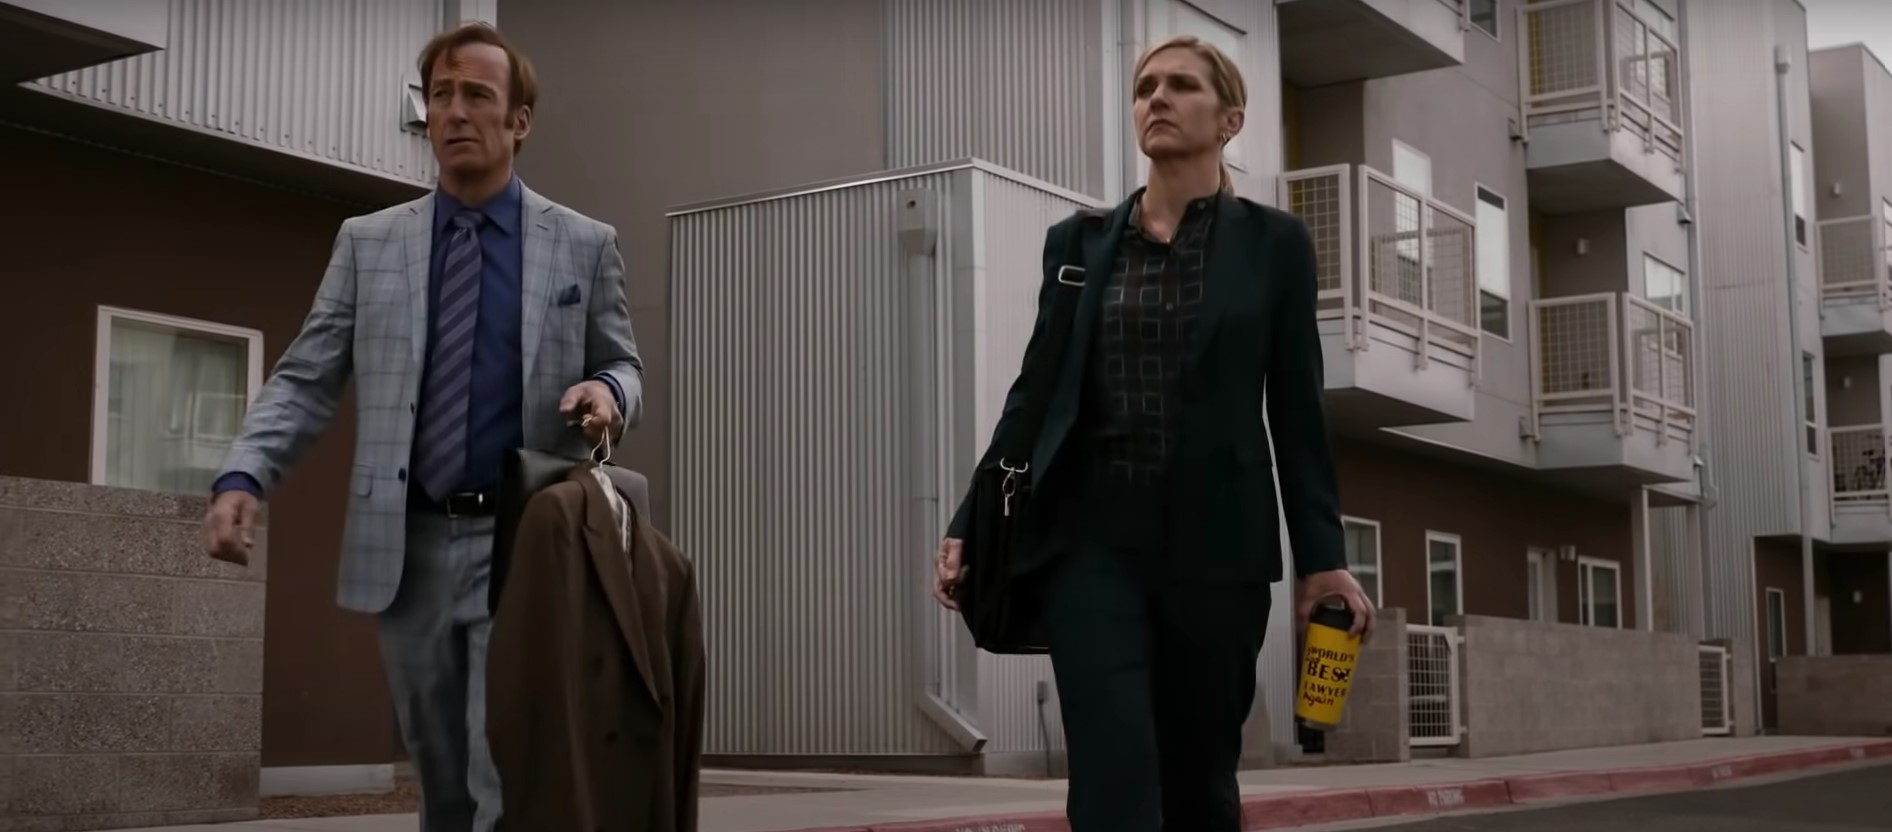 Better Call Saul Season 6 Episode 1 and 2 Recap and Ending Explained - ThiruttuVCD